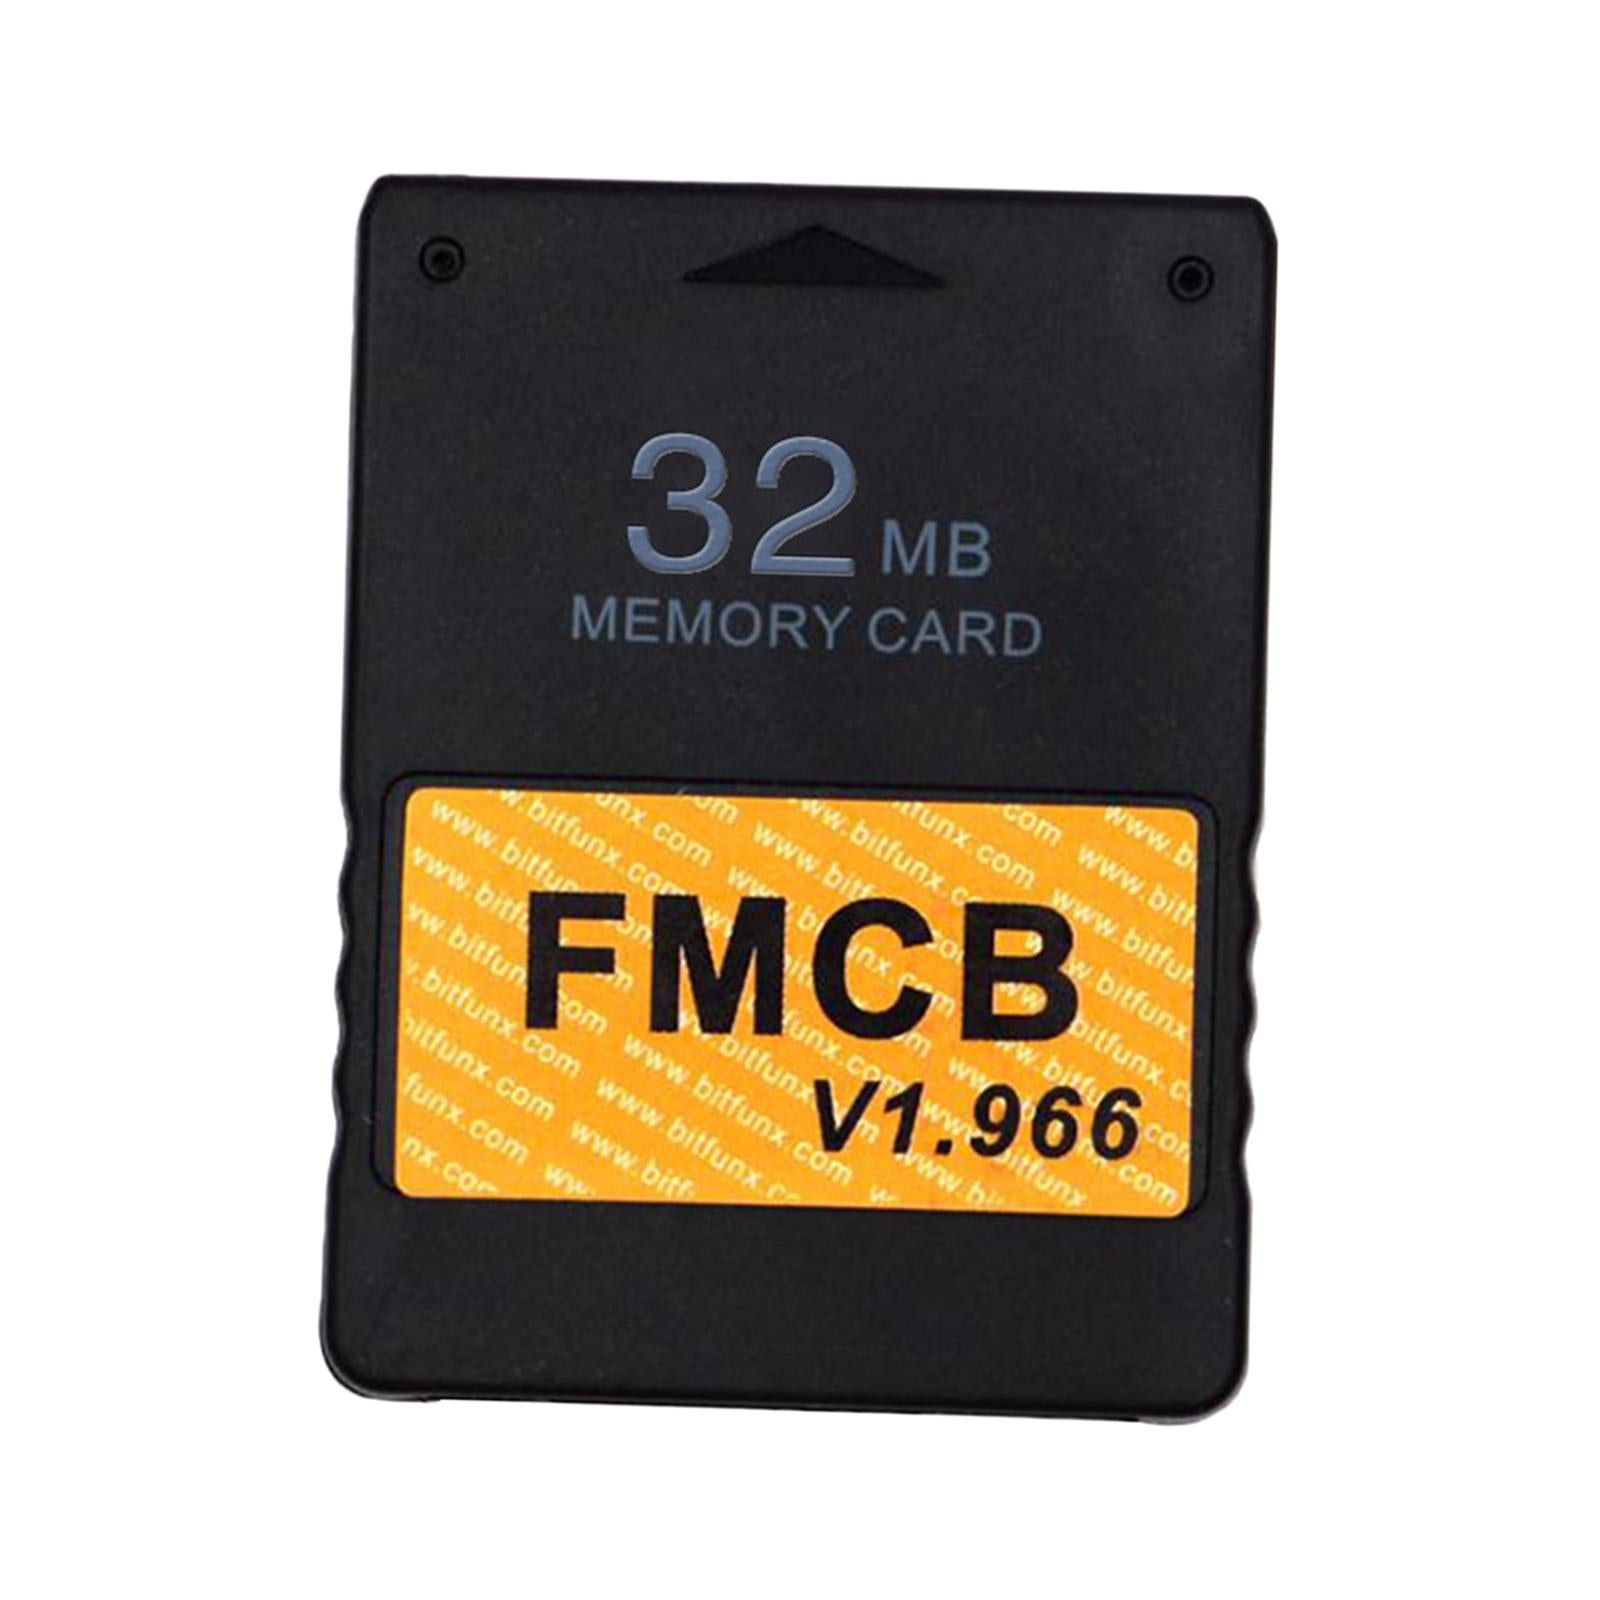 Free McBoot FMCB v1.966 Memory Card Fits for Sony PS2  32MB